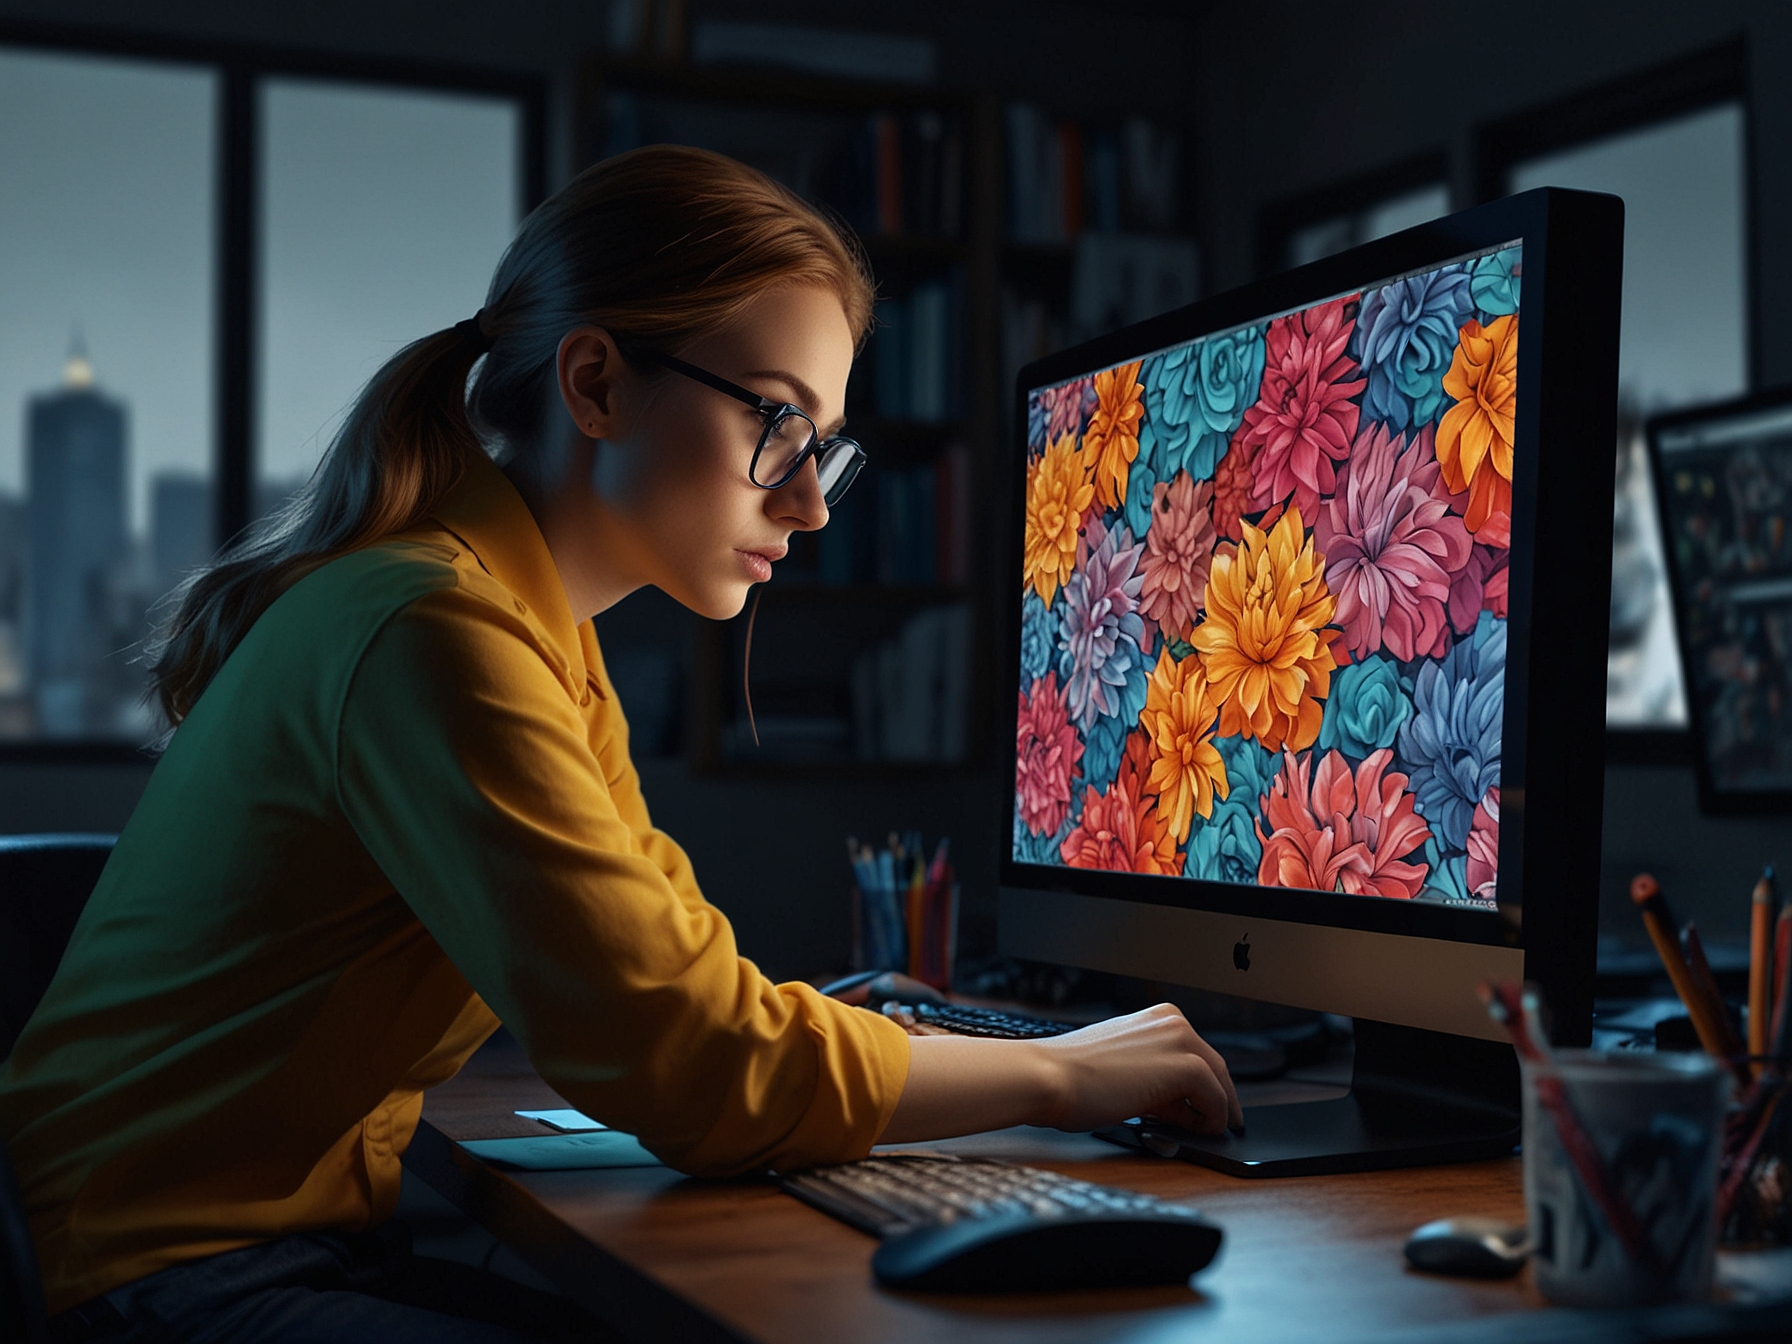 A graphic designer working on a detailed digital artwork on a 4K monitor with accurate colors and ultrawide screen, illustrating the professional advantages of advanced monitor features.